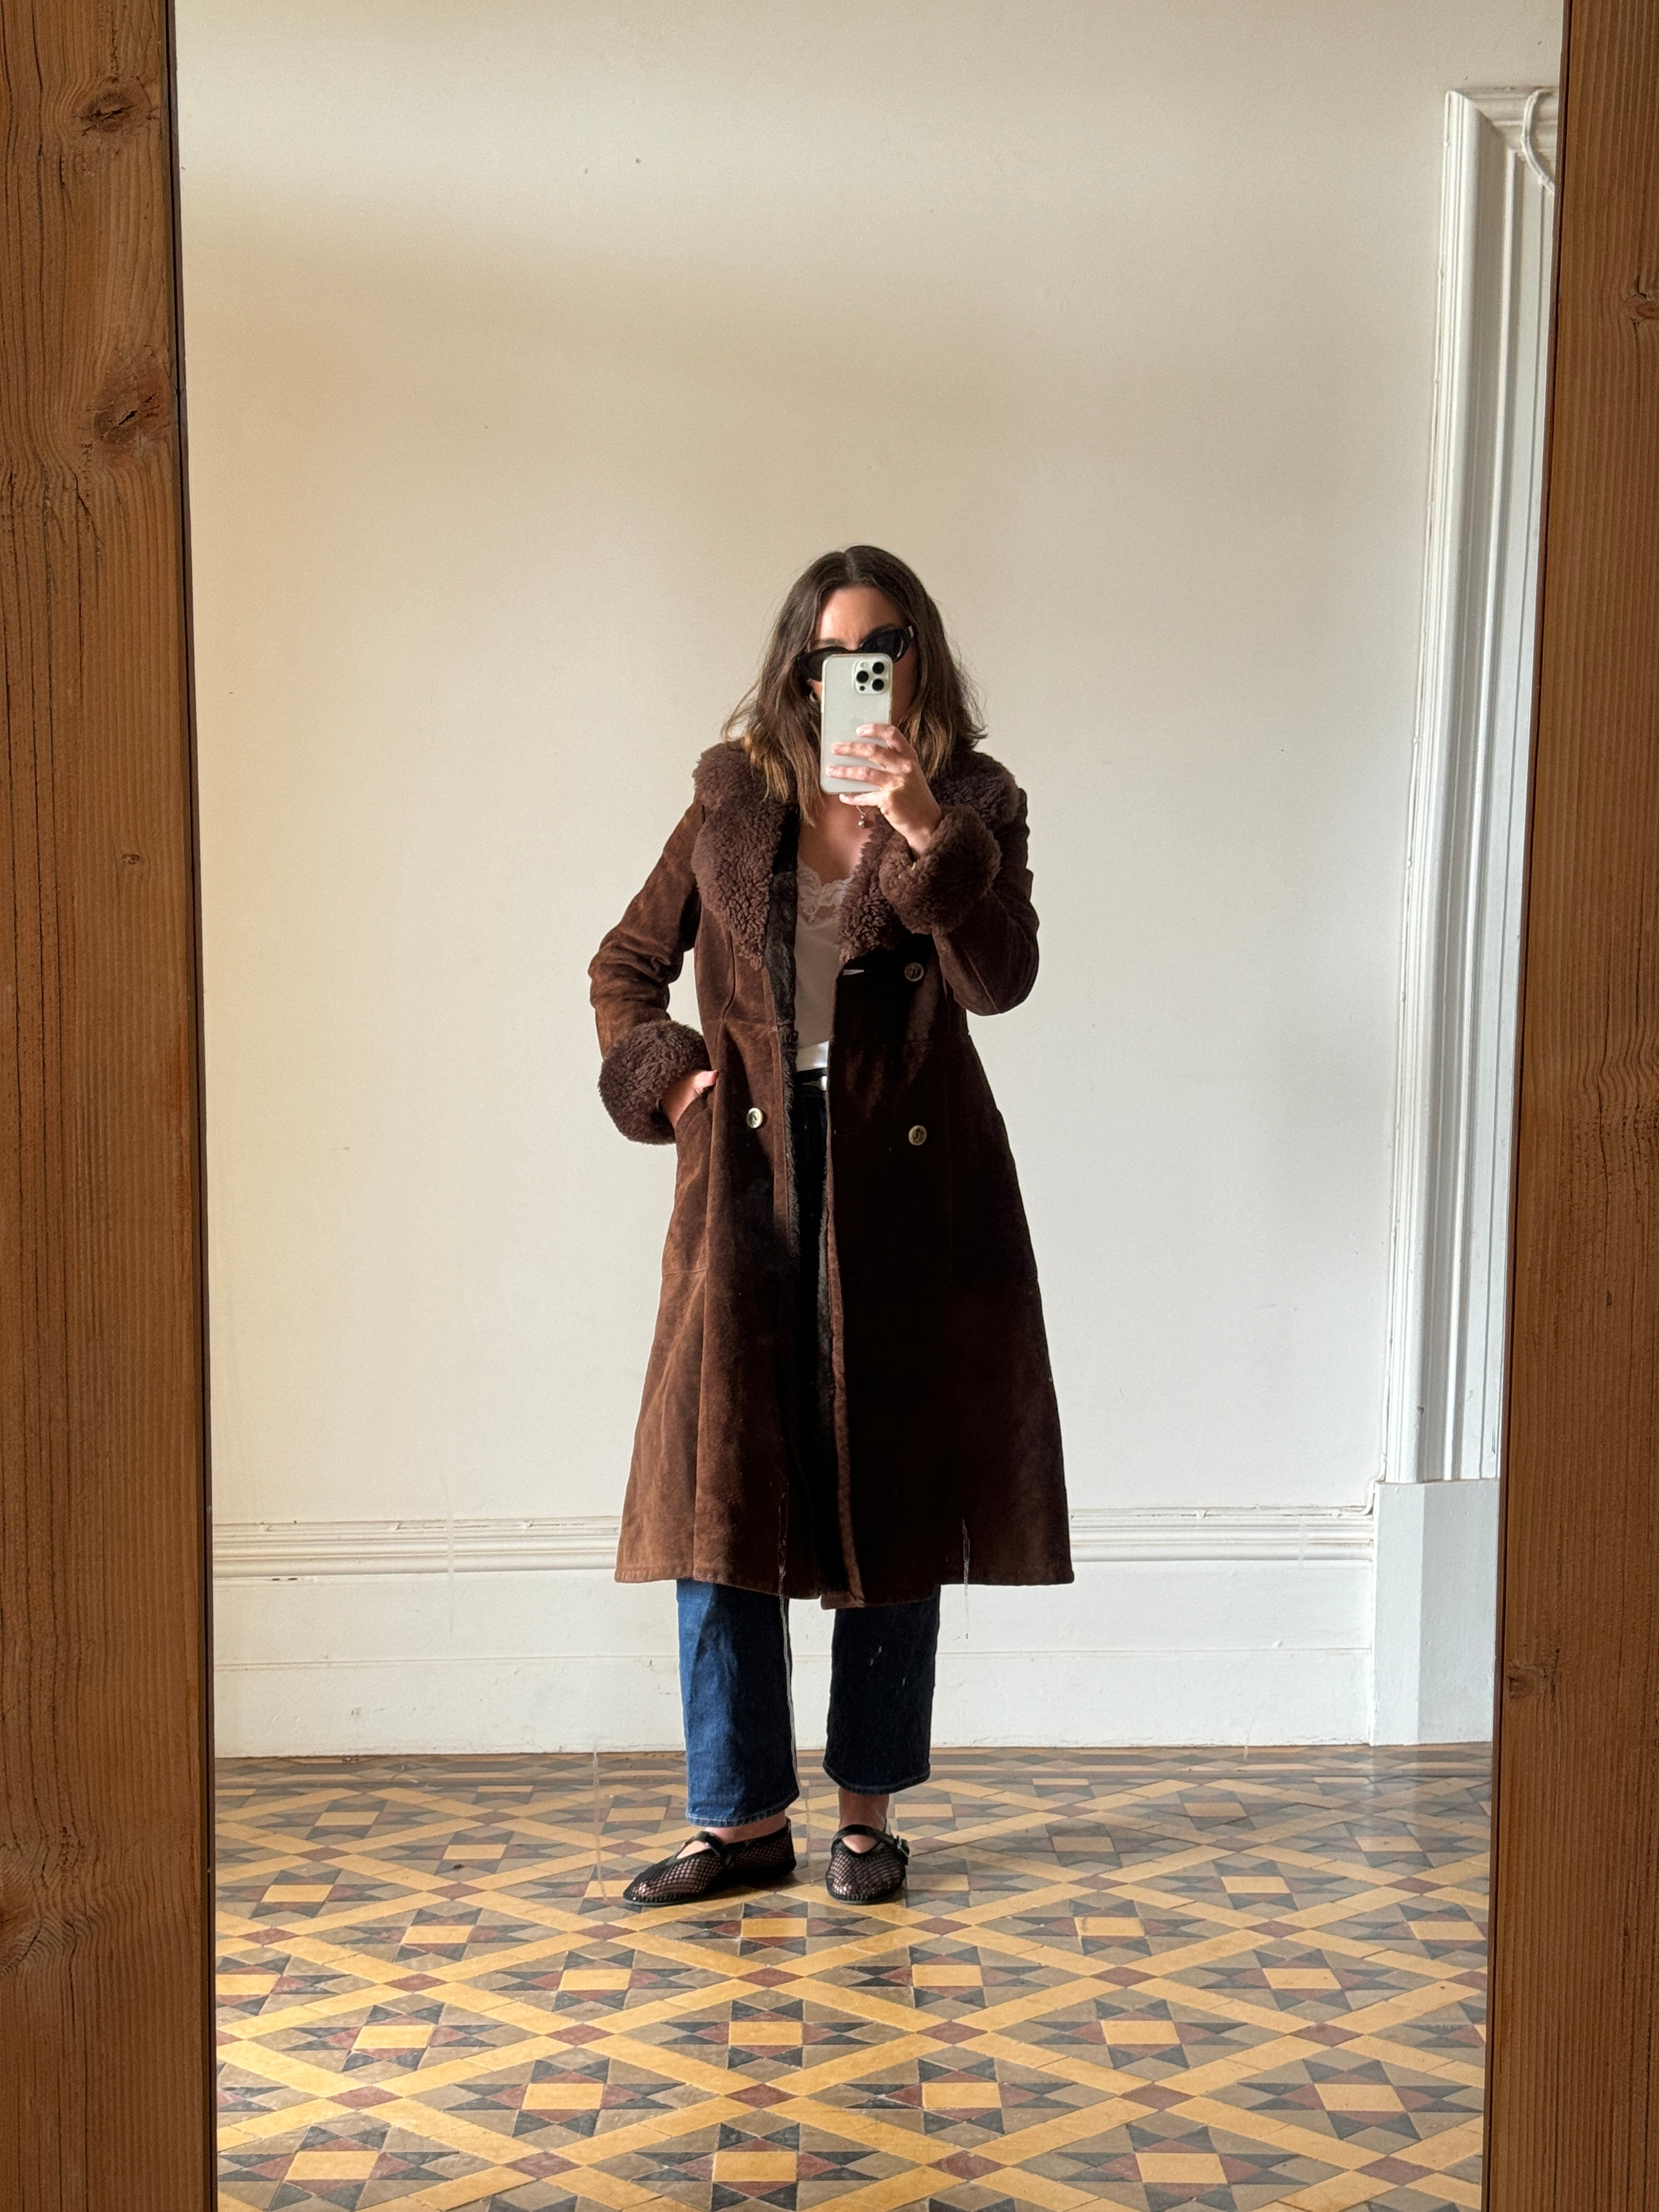 Vintage Suede Leather and Shearling Coat Chocolate Brown